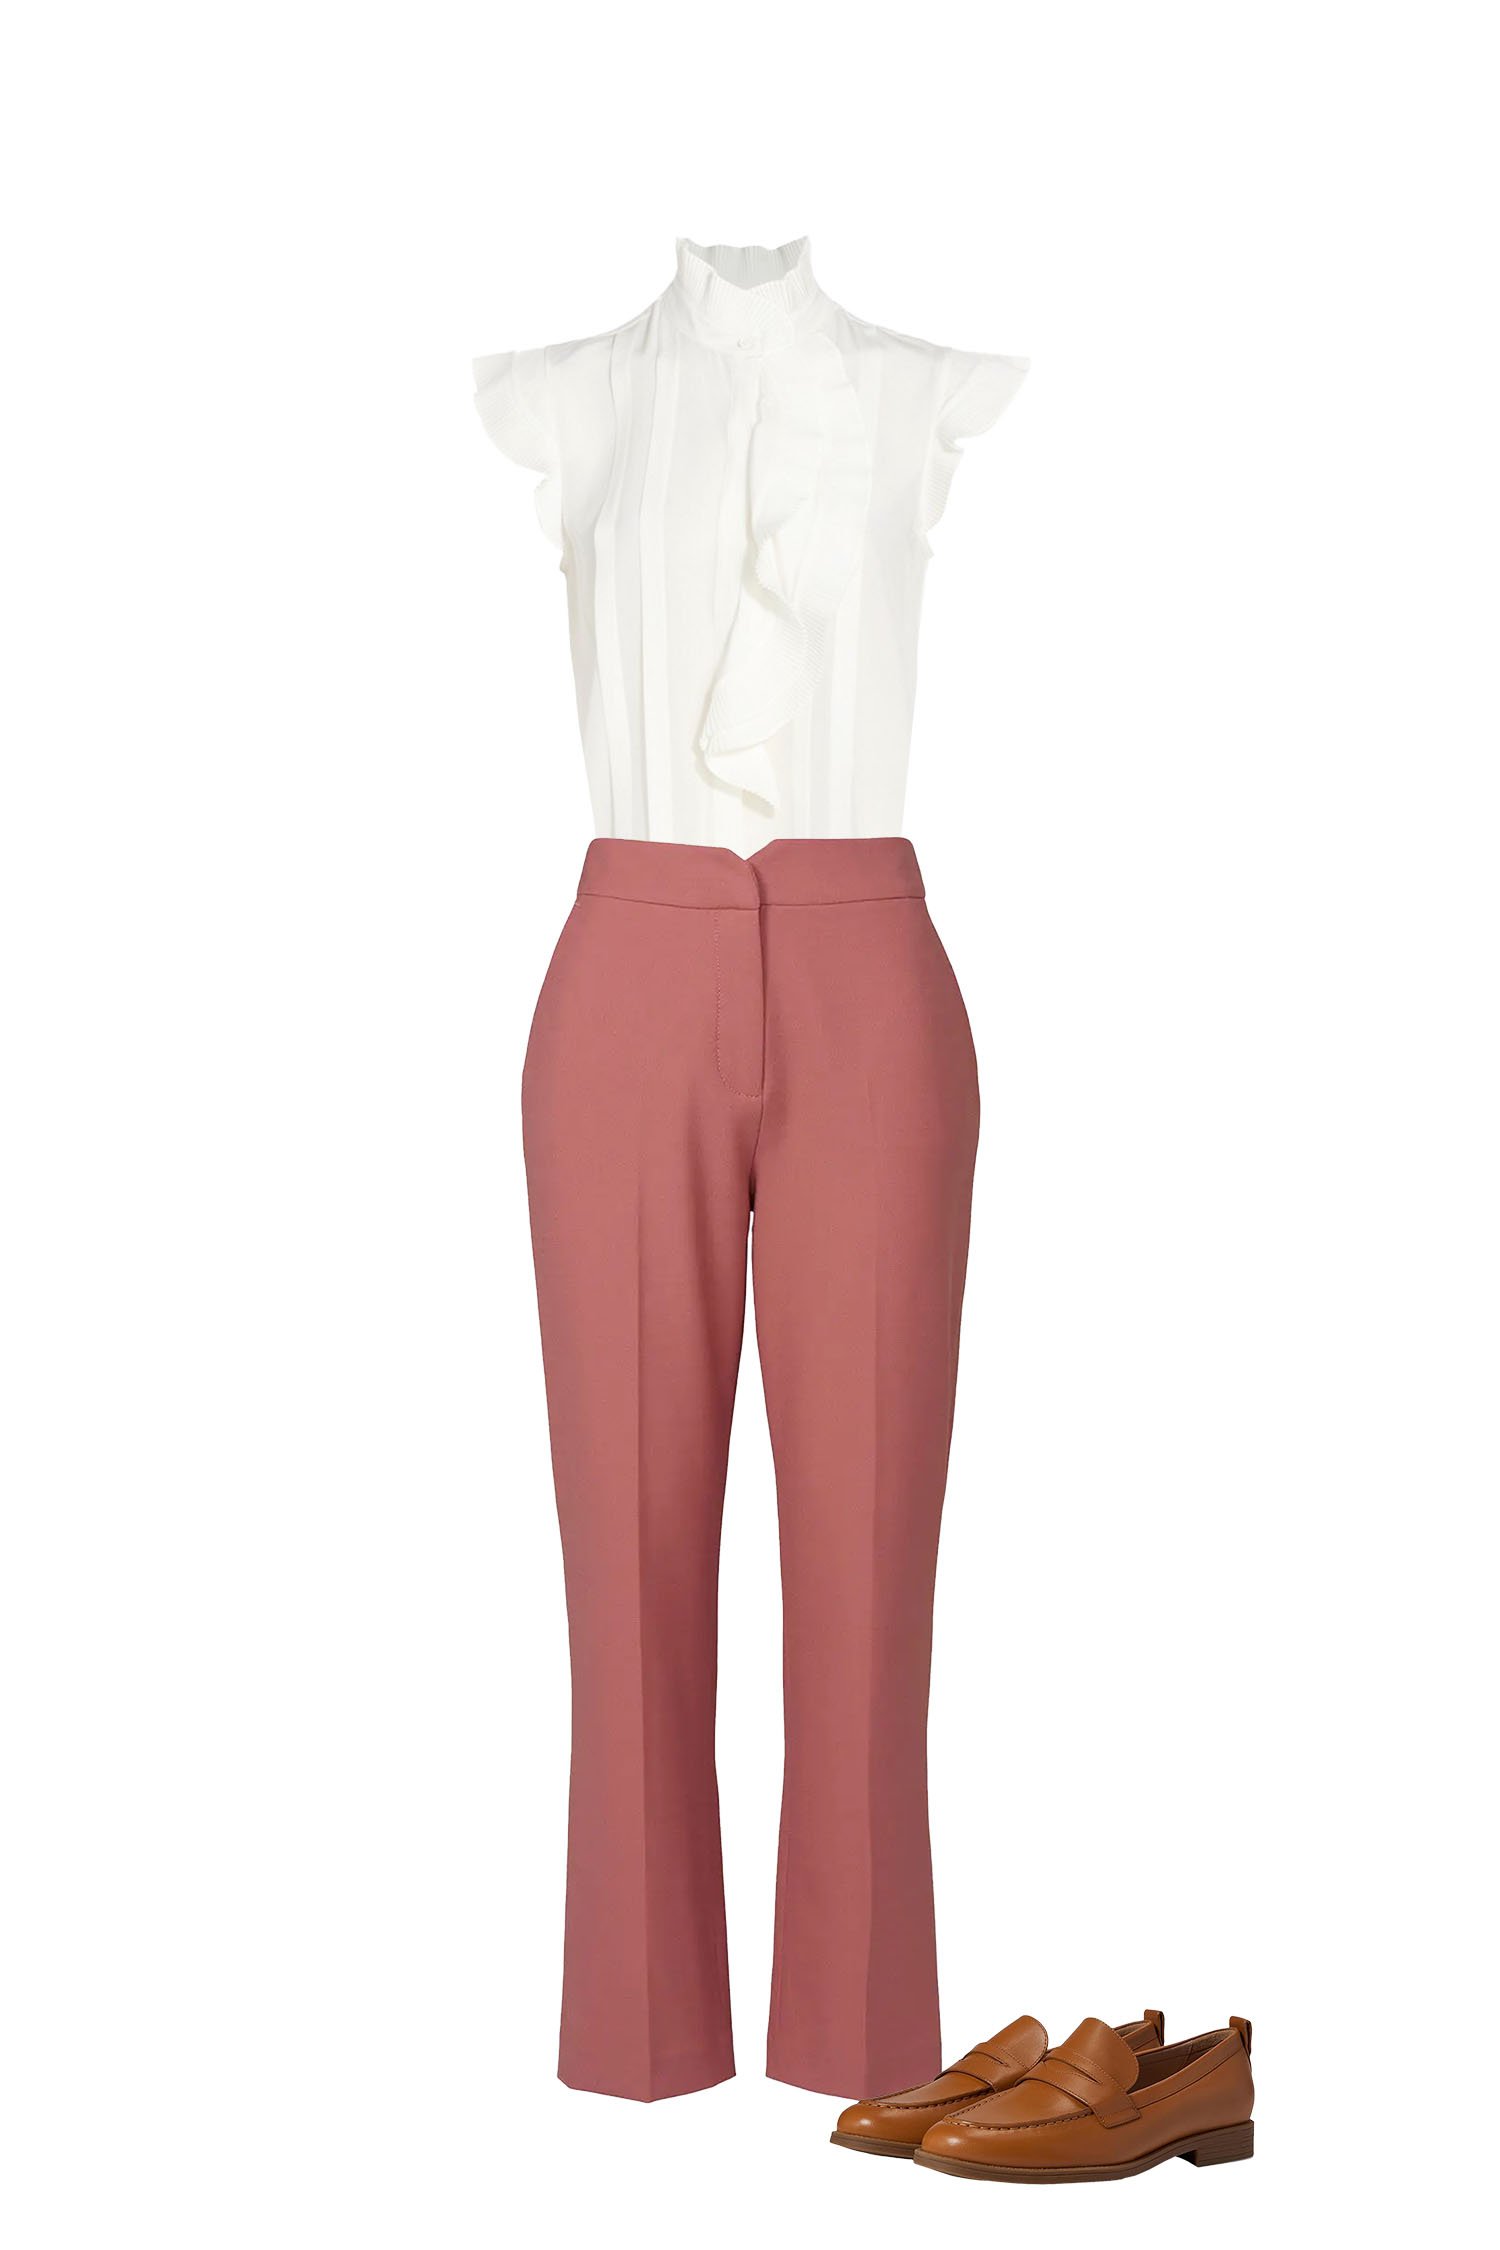 Spring Work Outfit - Rose Pink Ankle Pants, White Sleeveless Mock Neck Ruffle Blouse, Brown Loafers